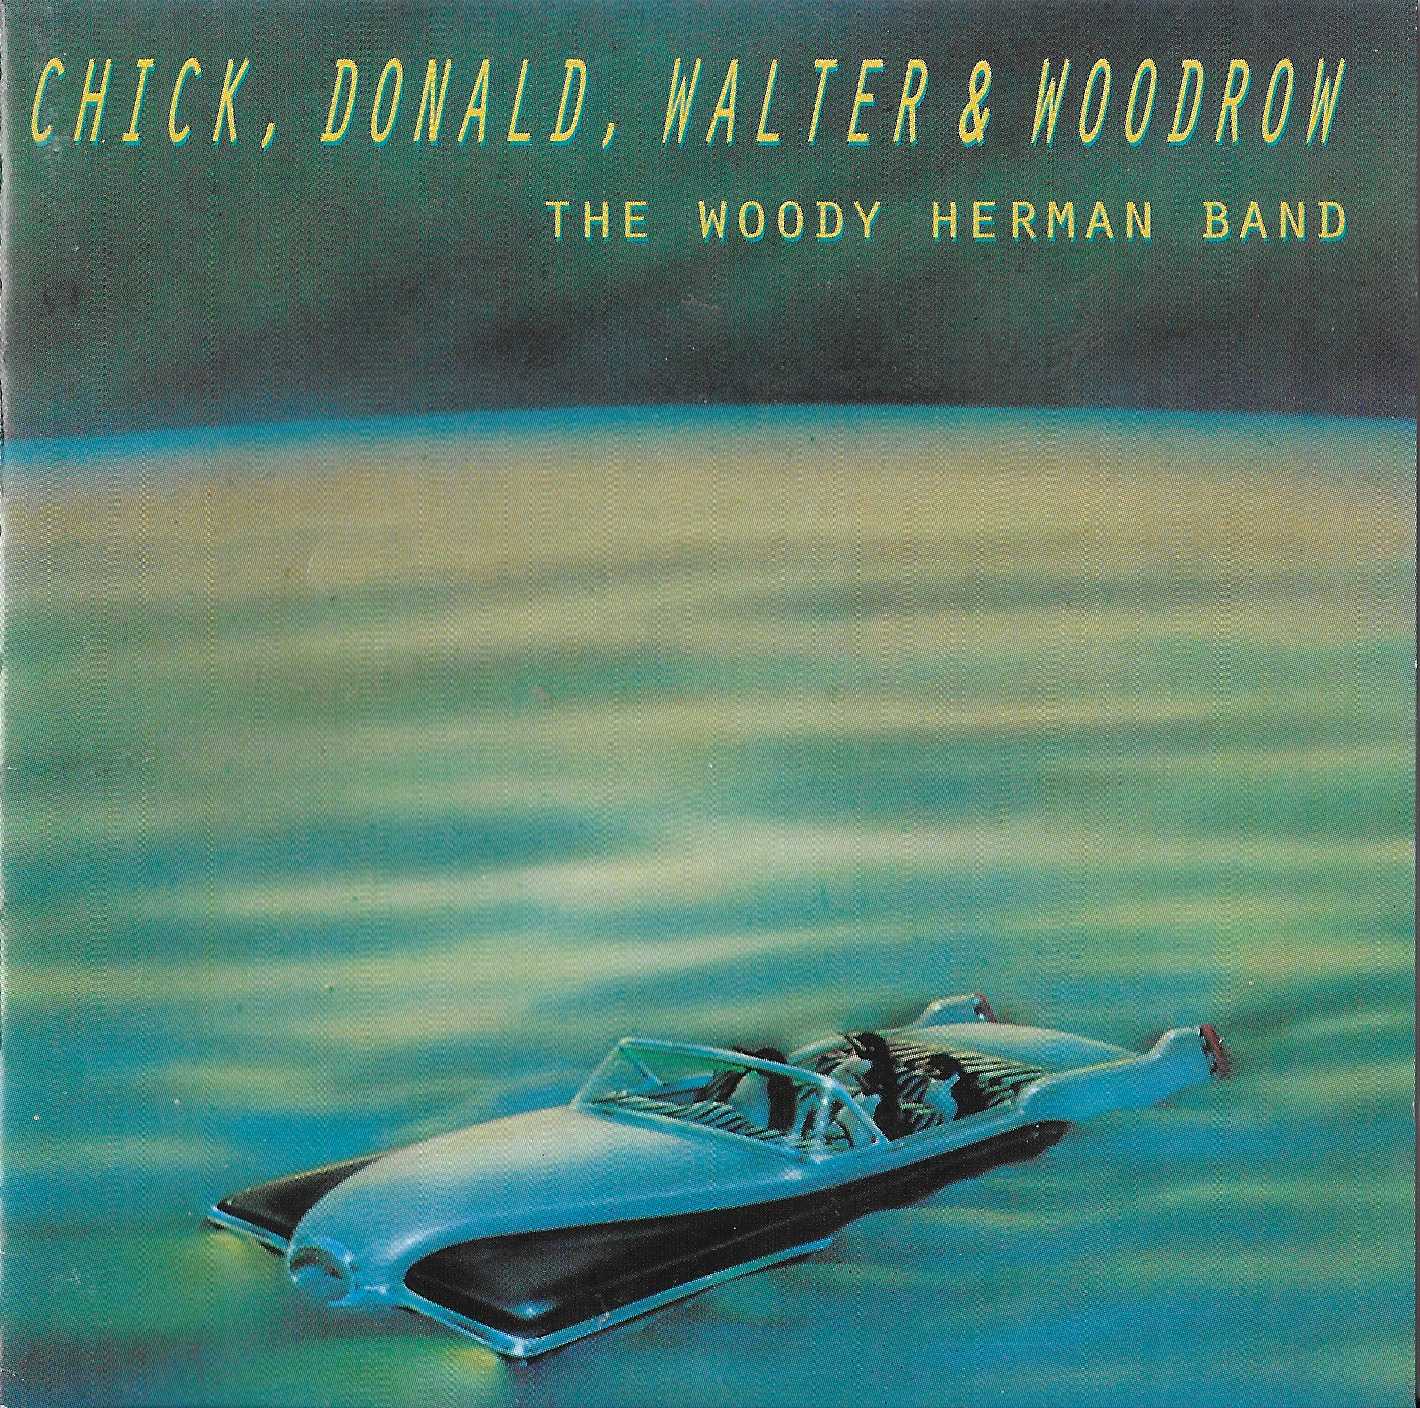 Picture of The Century Catalogue - The Woody Herman Band plays the music of Chick Corea, Donald Fagen and Walter Becker by artist Chich Corea / Walter Becker / Donald Fagen / Woody Herman from the BBC cds - Records and Tapes library